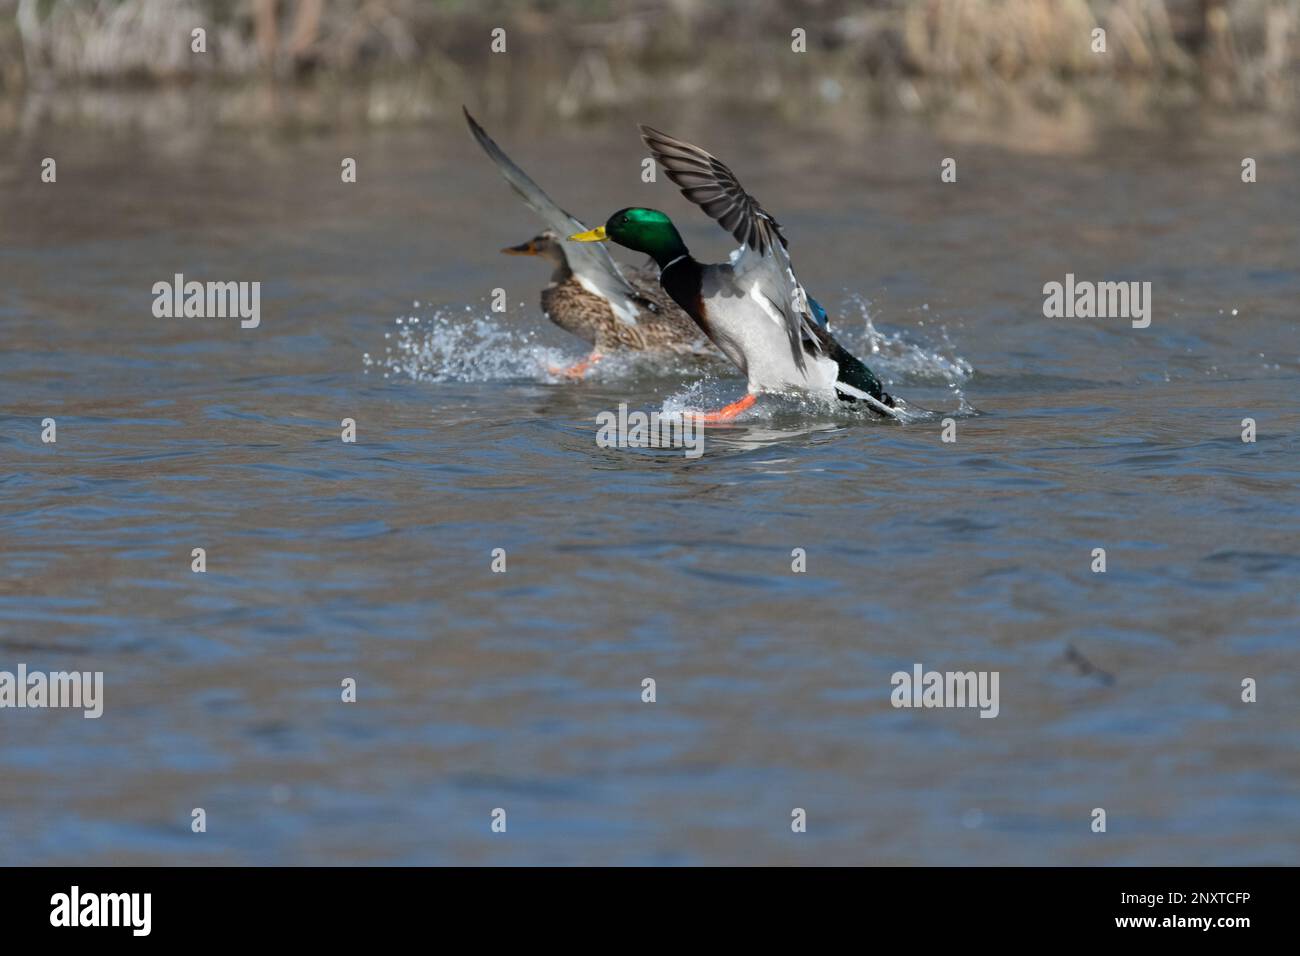 Two Mallard Ducks reaching out with their feet as they prepare to make a splash landing on the water of a lake. Stock Photo